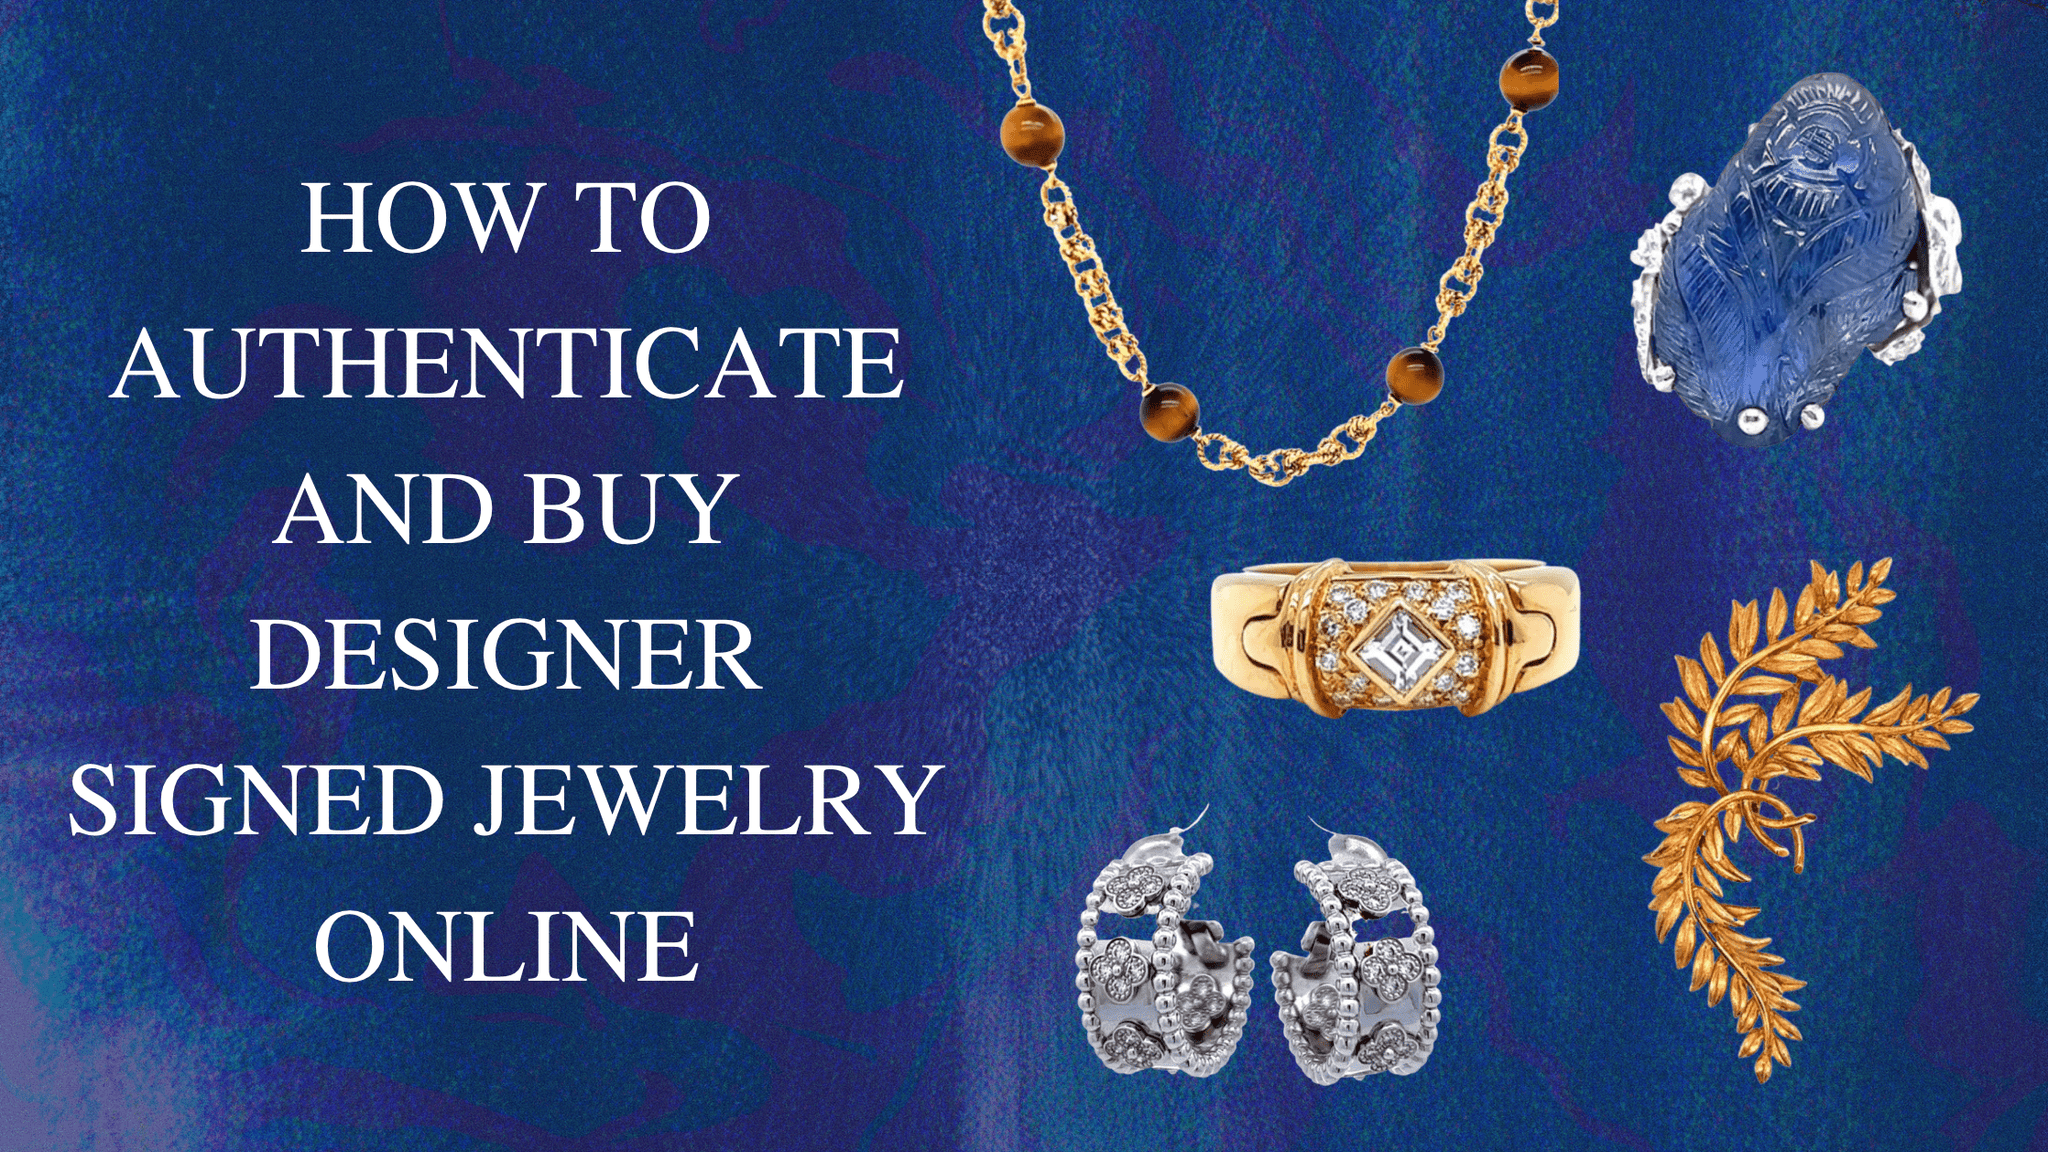 How to Authenticate and Buy Designer Signed Jewelry Online - Jack Weir & Sons